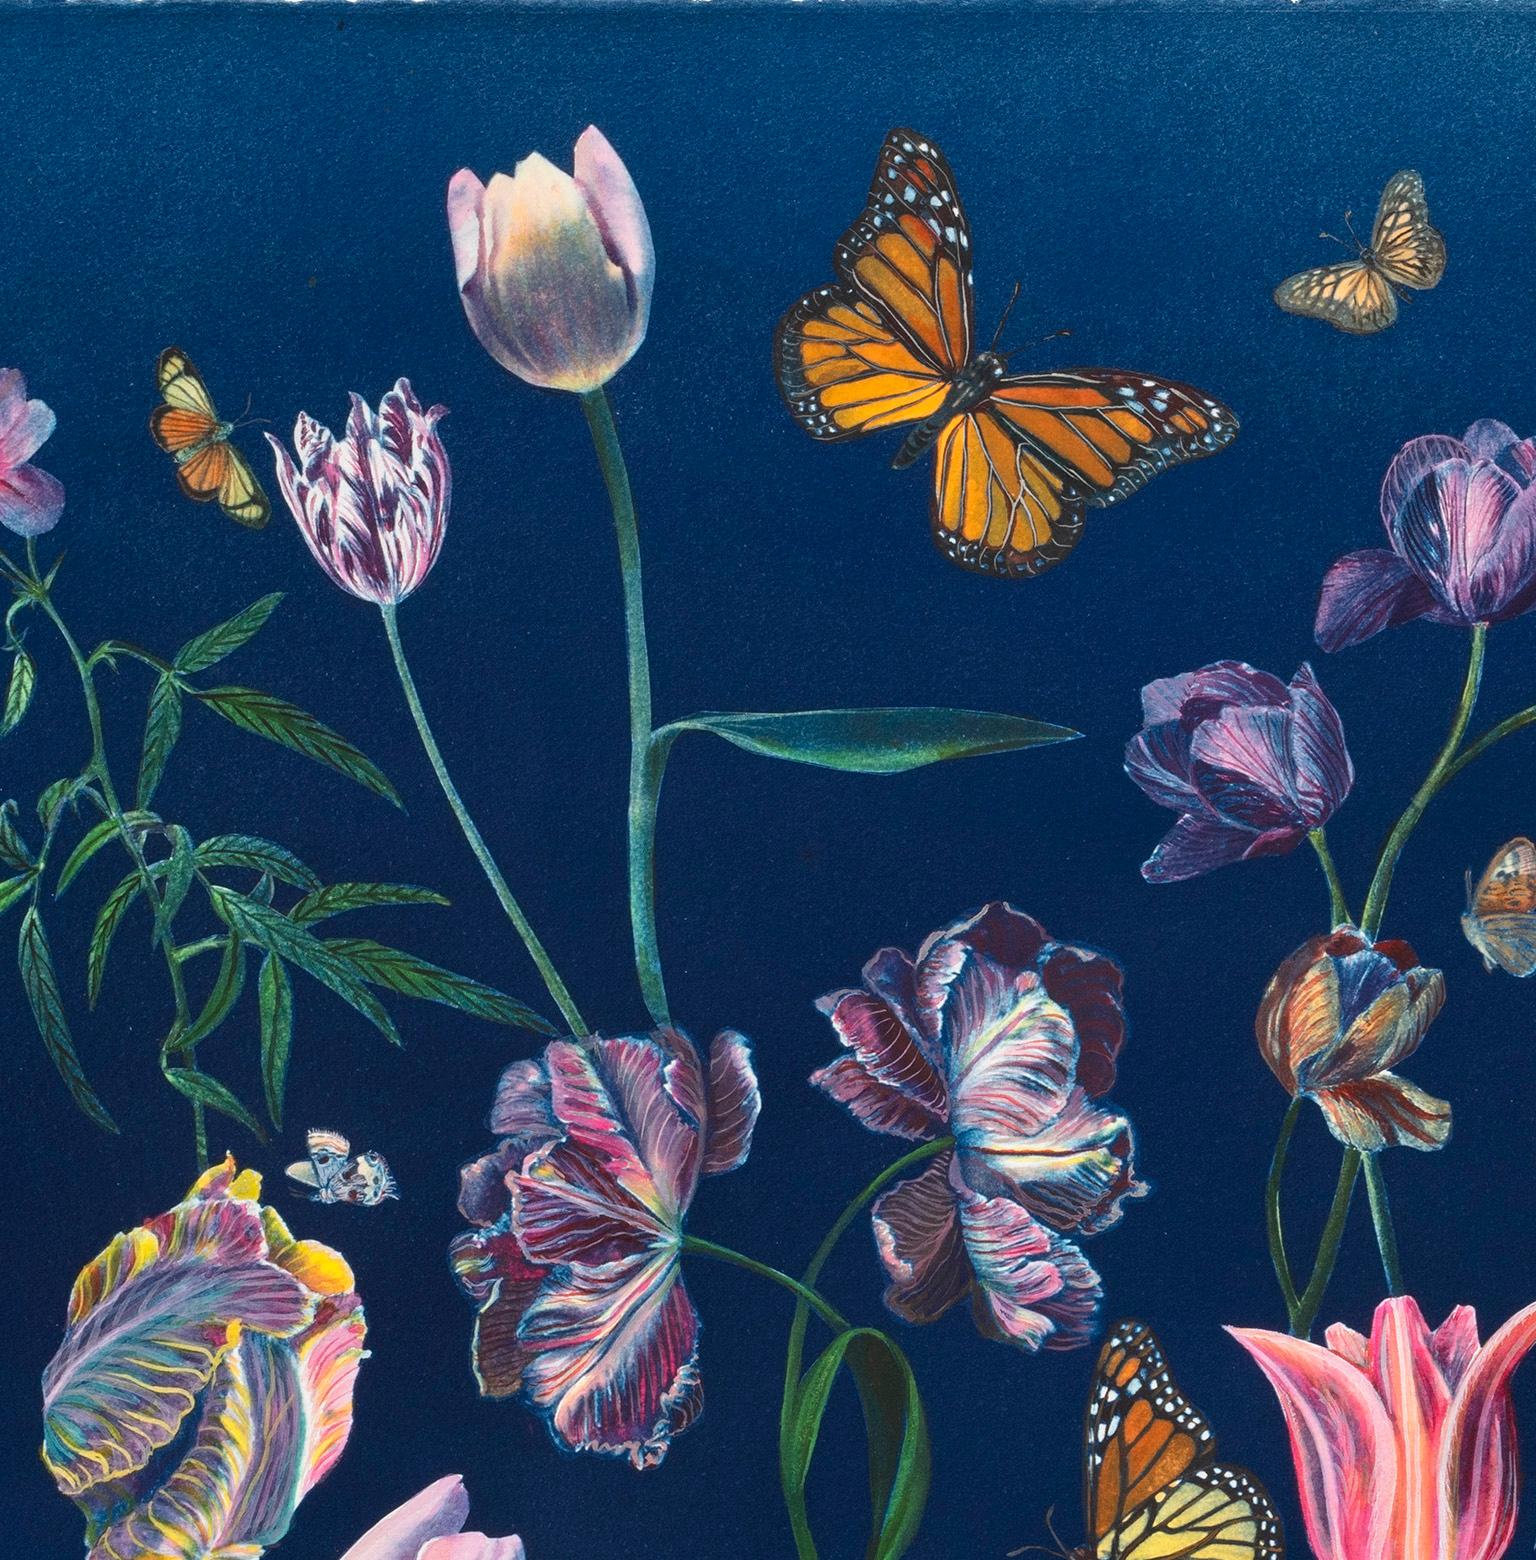 In this horizontal work in watercolor, gouache, and cyanotype on cotton Arches paper, meticulously detailed flowers, including tulips, daffodils and crocus are colorful and luminous in shades of pink, bright yellow, purple and green against a deep,